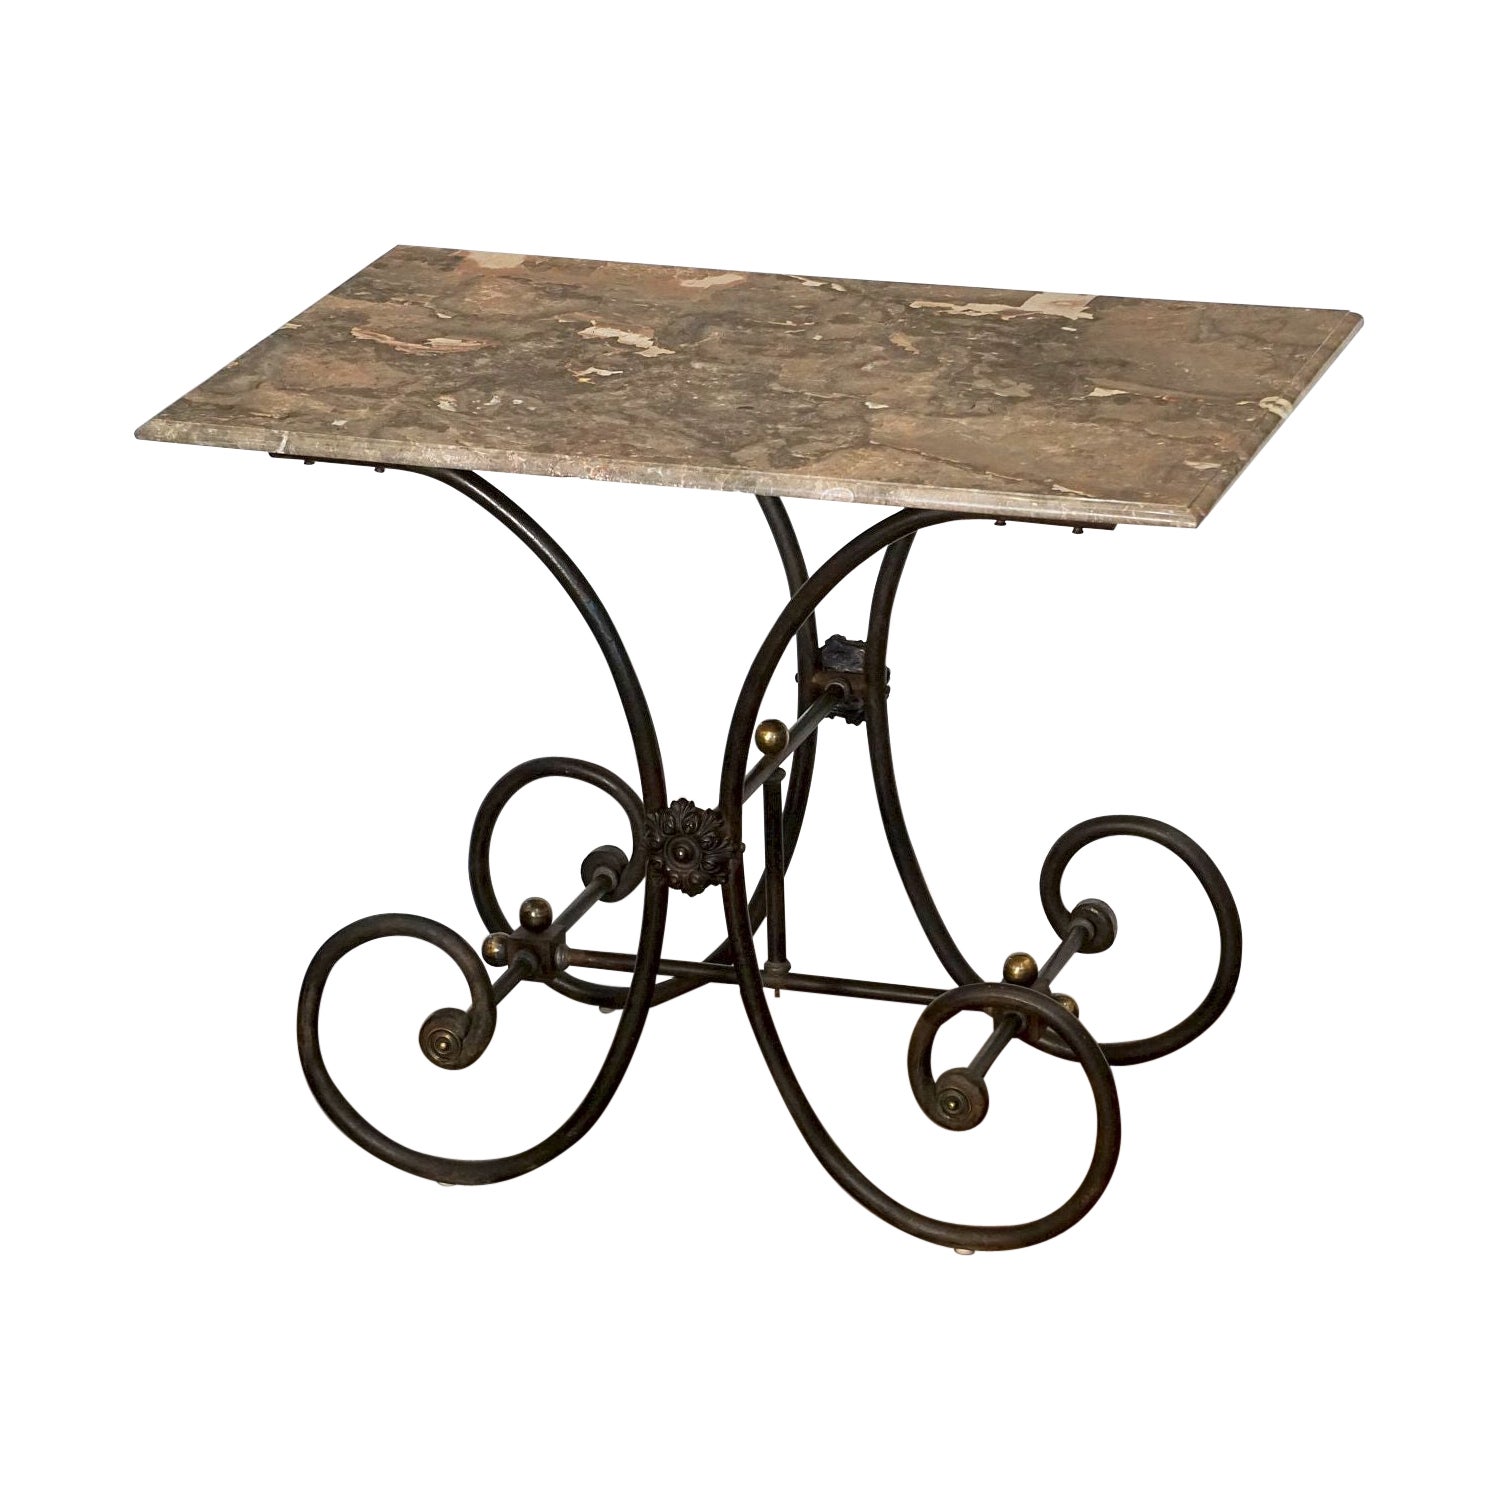 French Baker's Patisserie Table with Marble Top and Wrought Iron Base For Sale